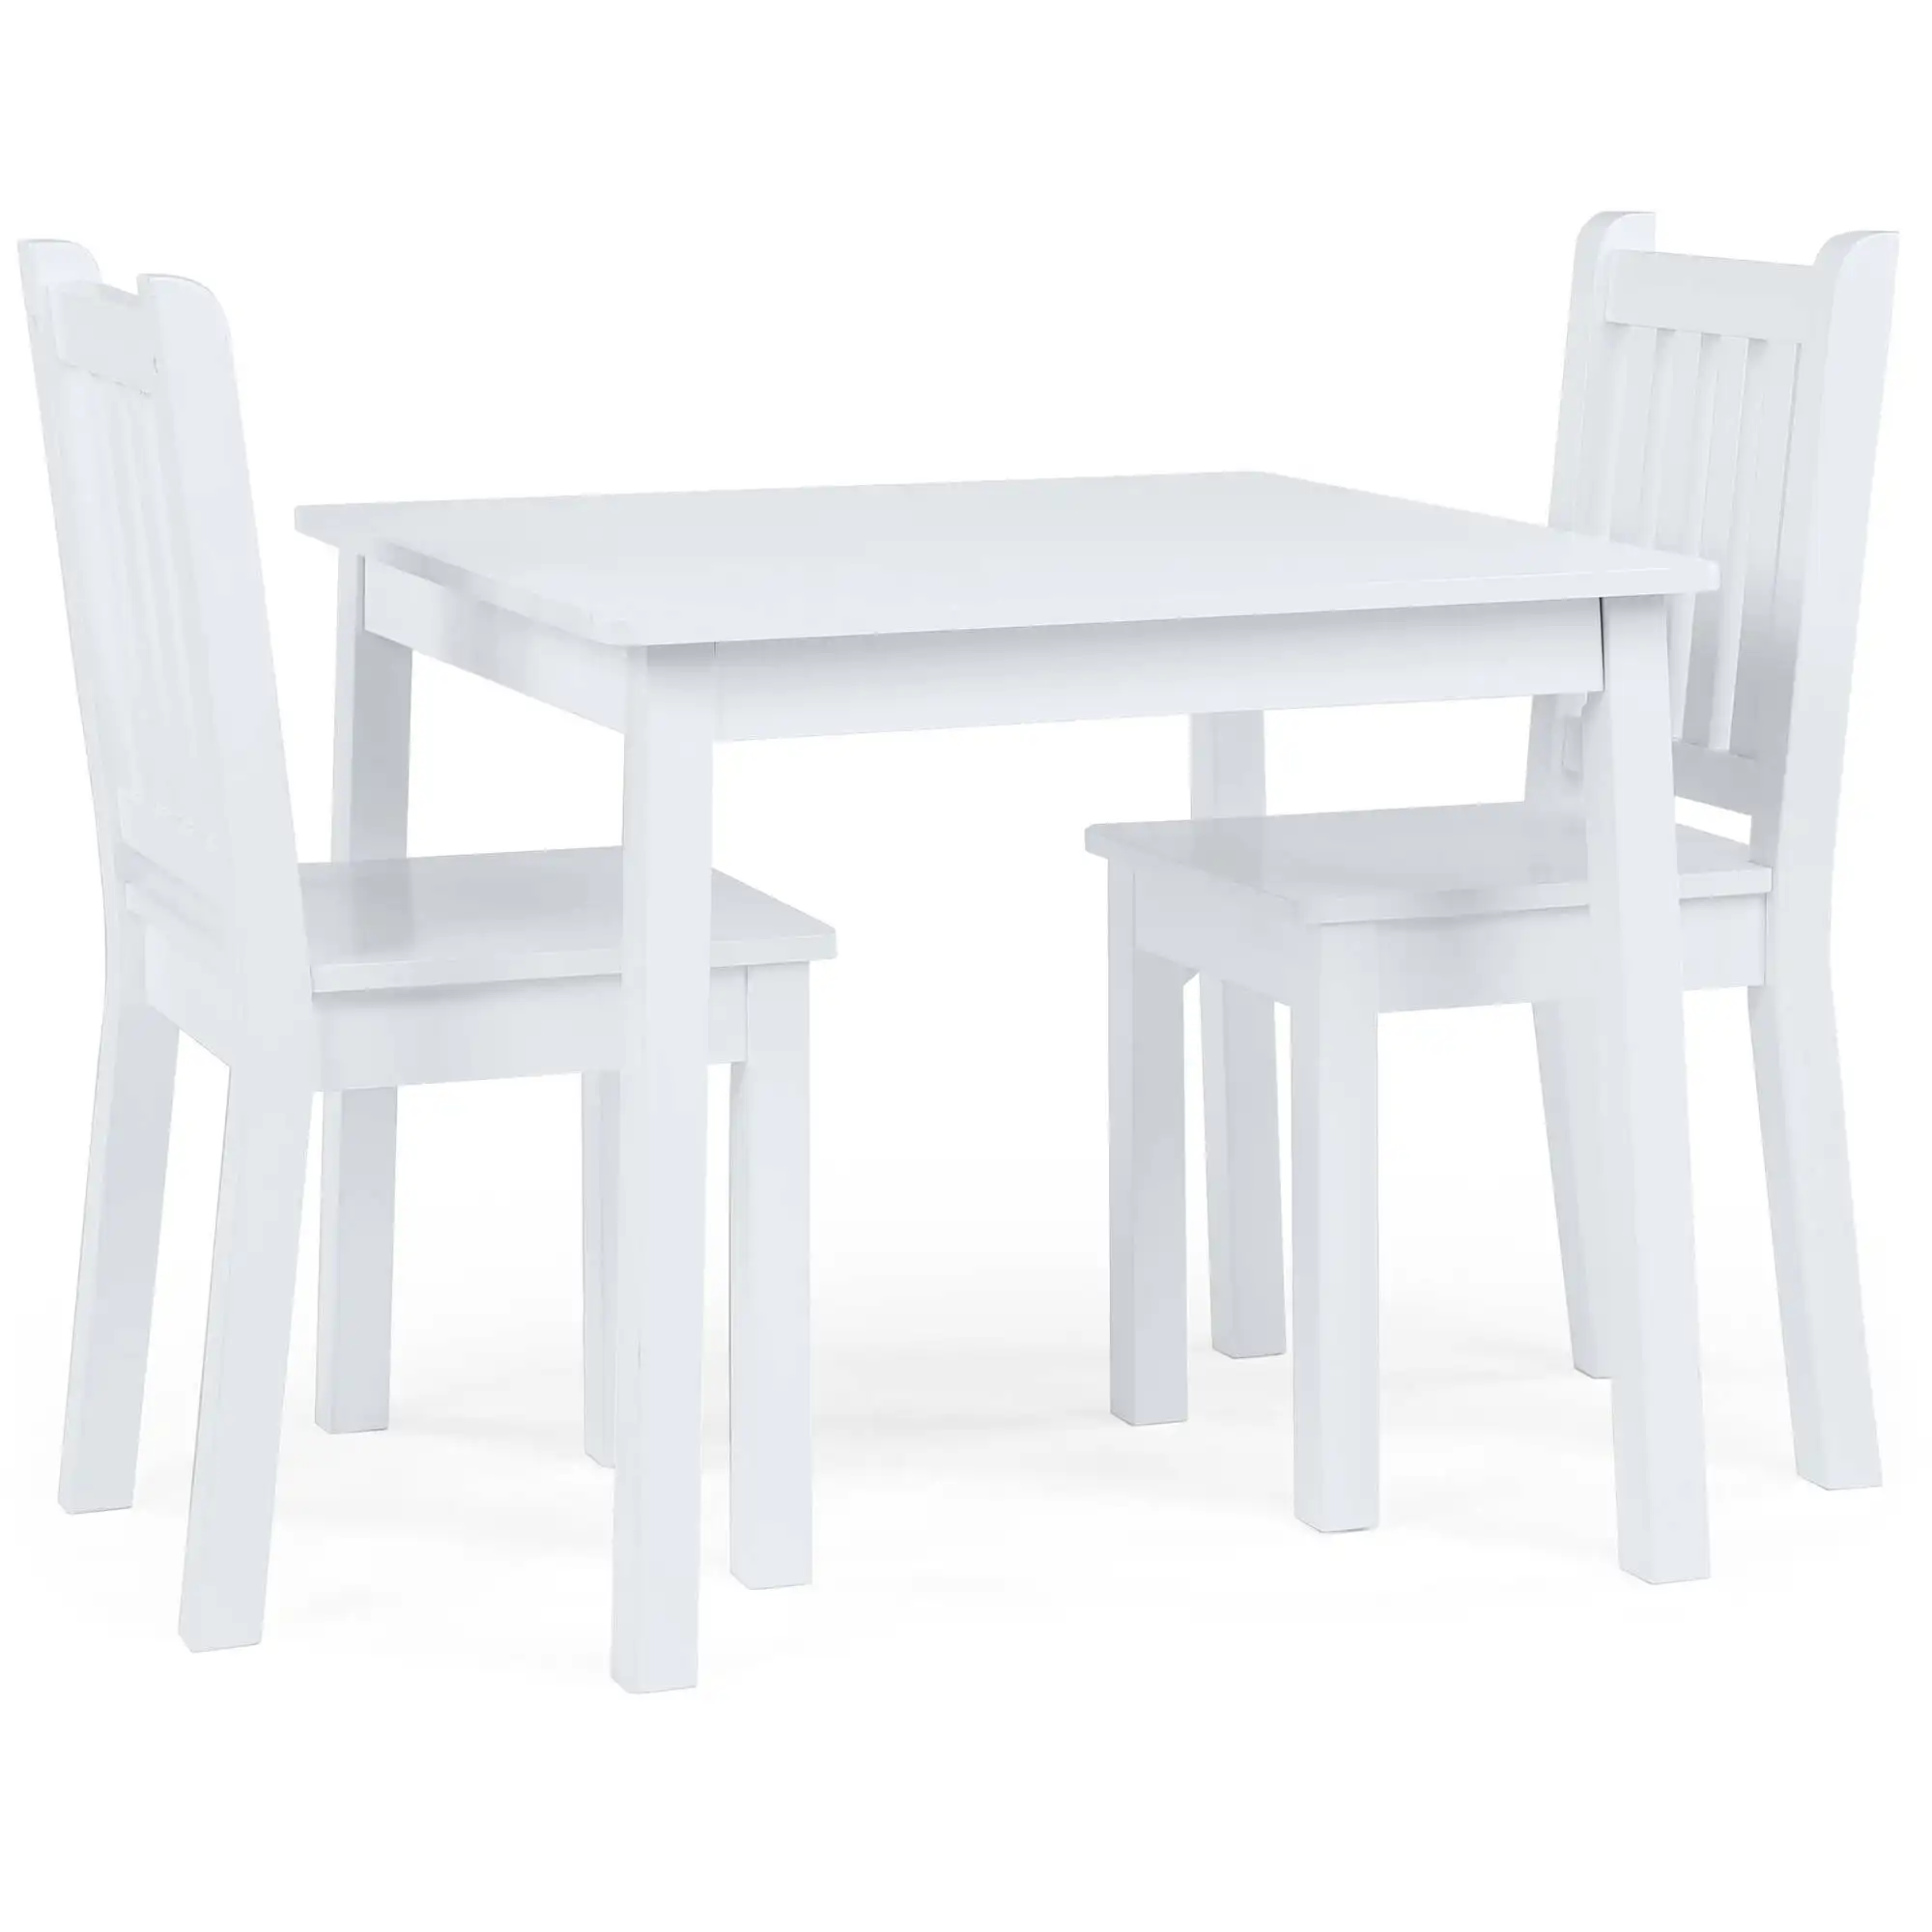 

Humble Crew Daylight Kids Wood Square Table and 2 Chairs Set, White